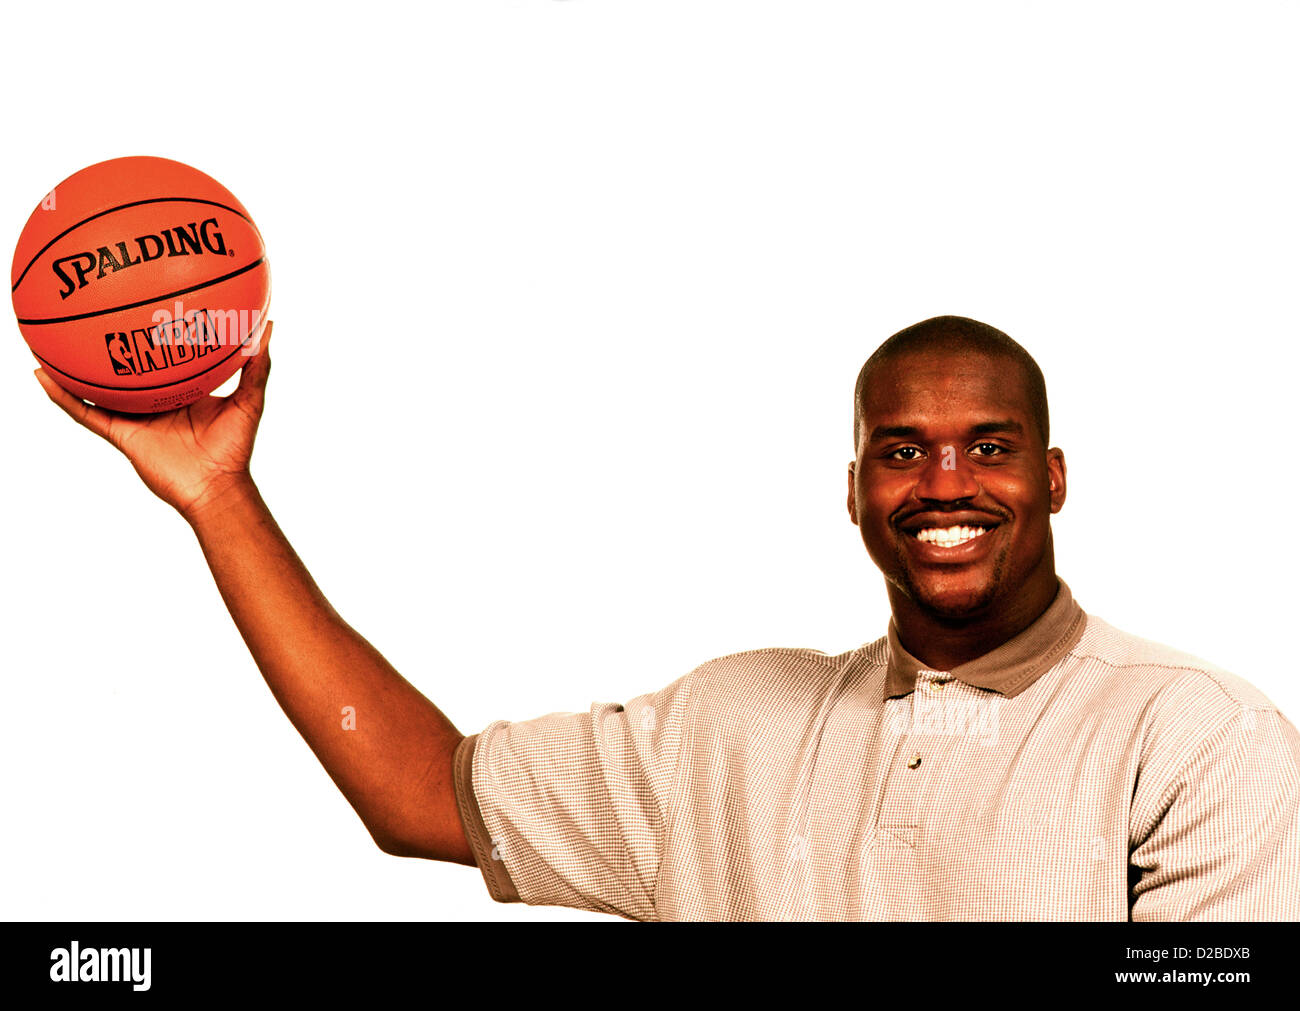 Basketball Star Shaquille O'Neal Stock Photo